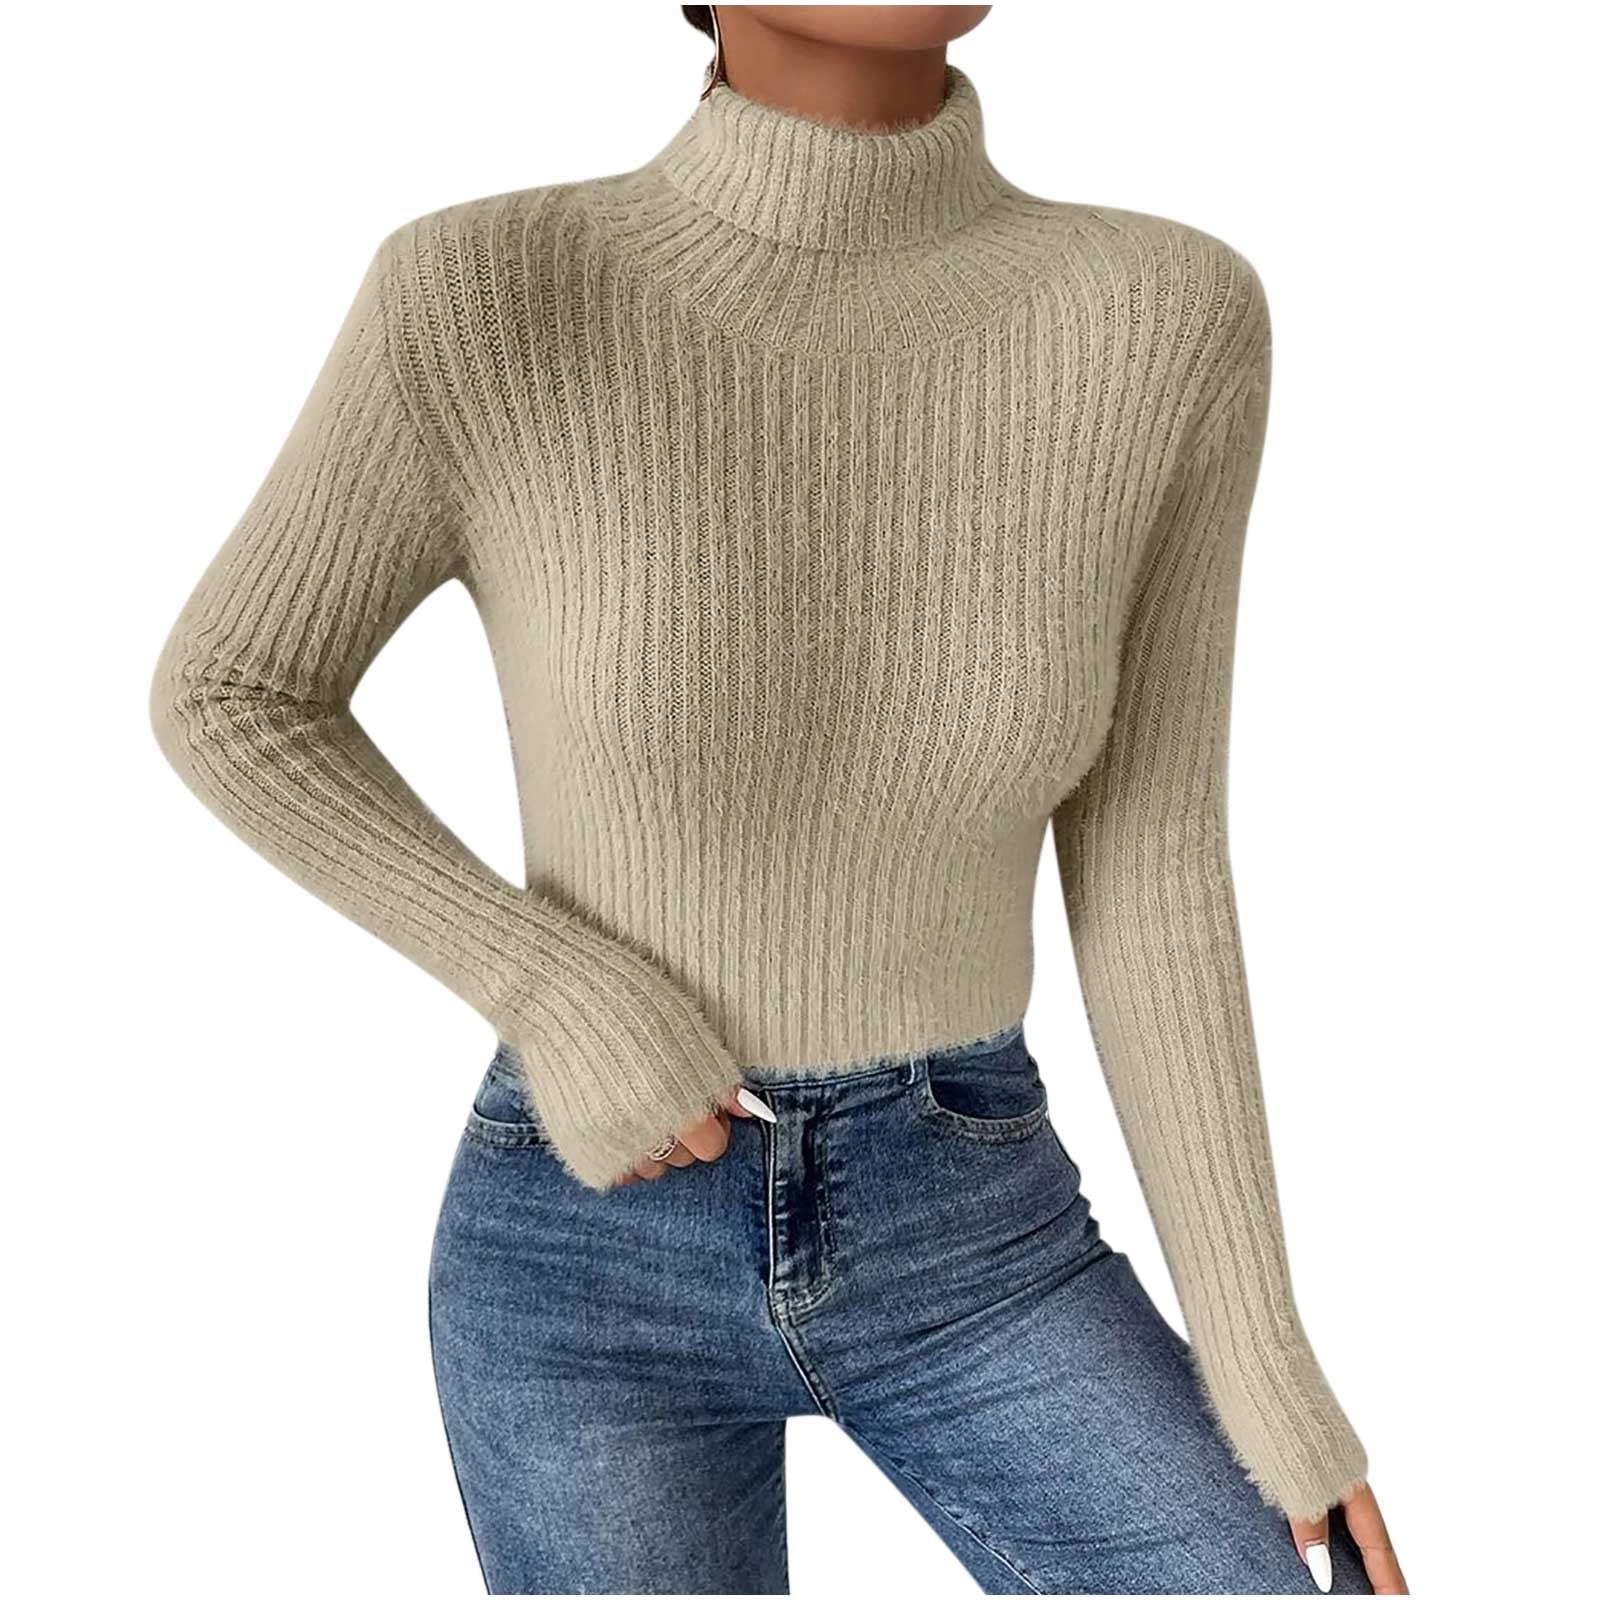 Olyvenn Womens Turtle-Neck Cropped Knit Sweater Tops Casual Plus Size ...